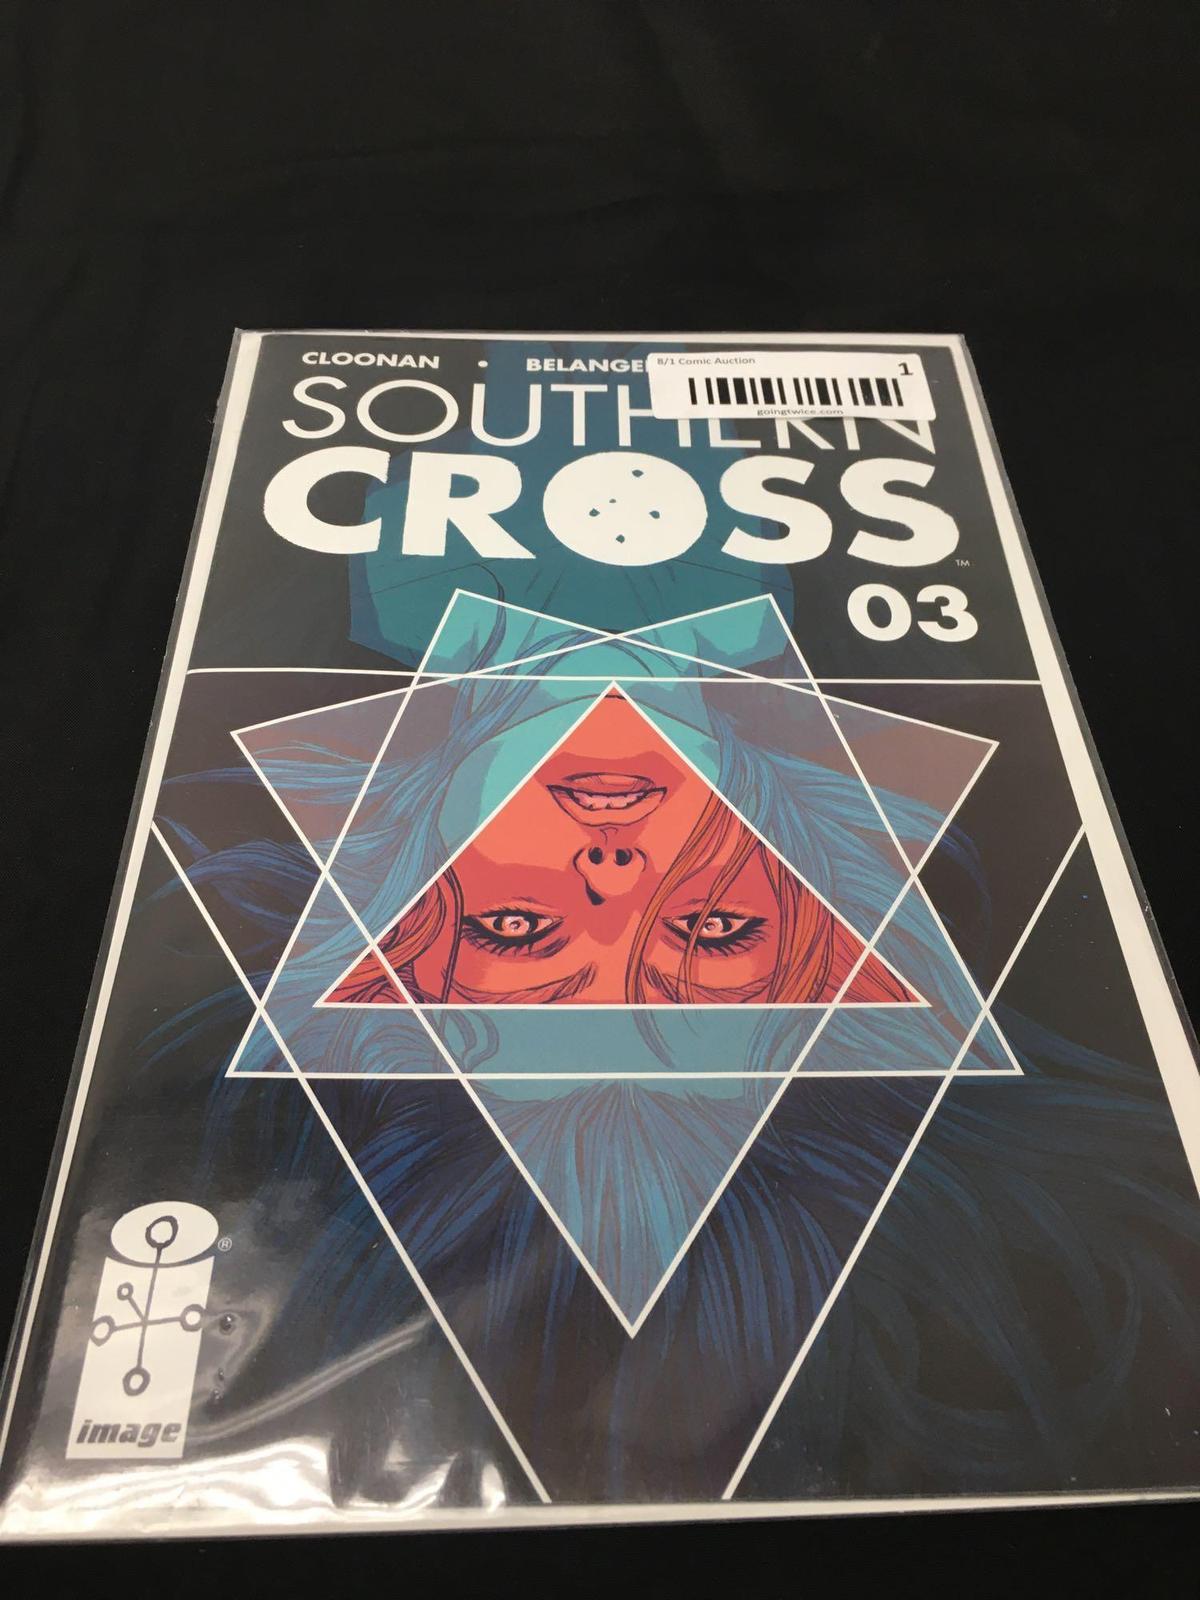 Southern Cross #3 Comic Book from Amazing Collection